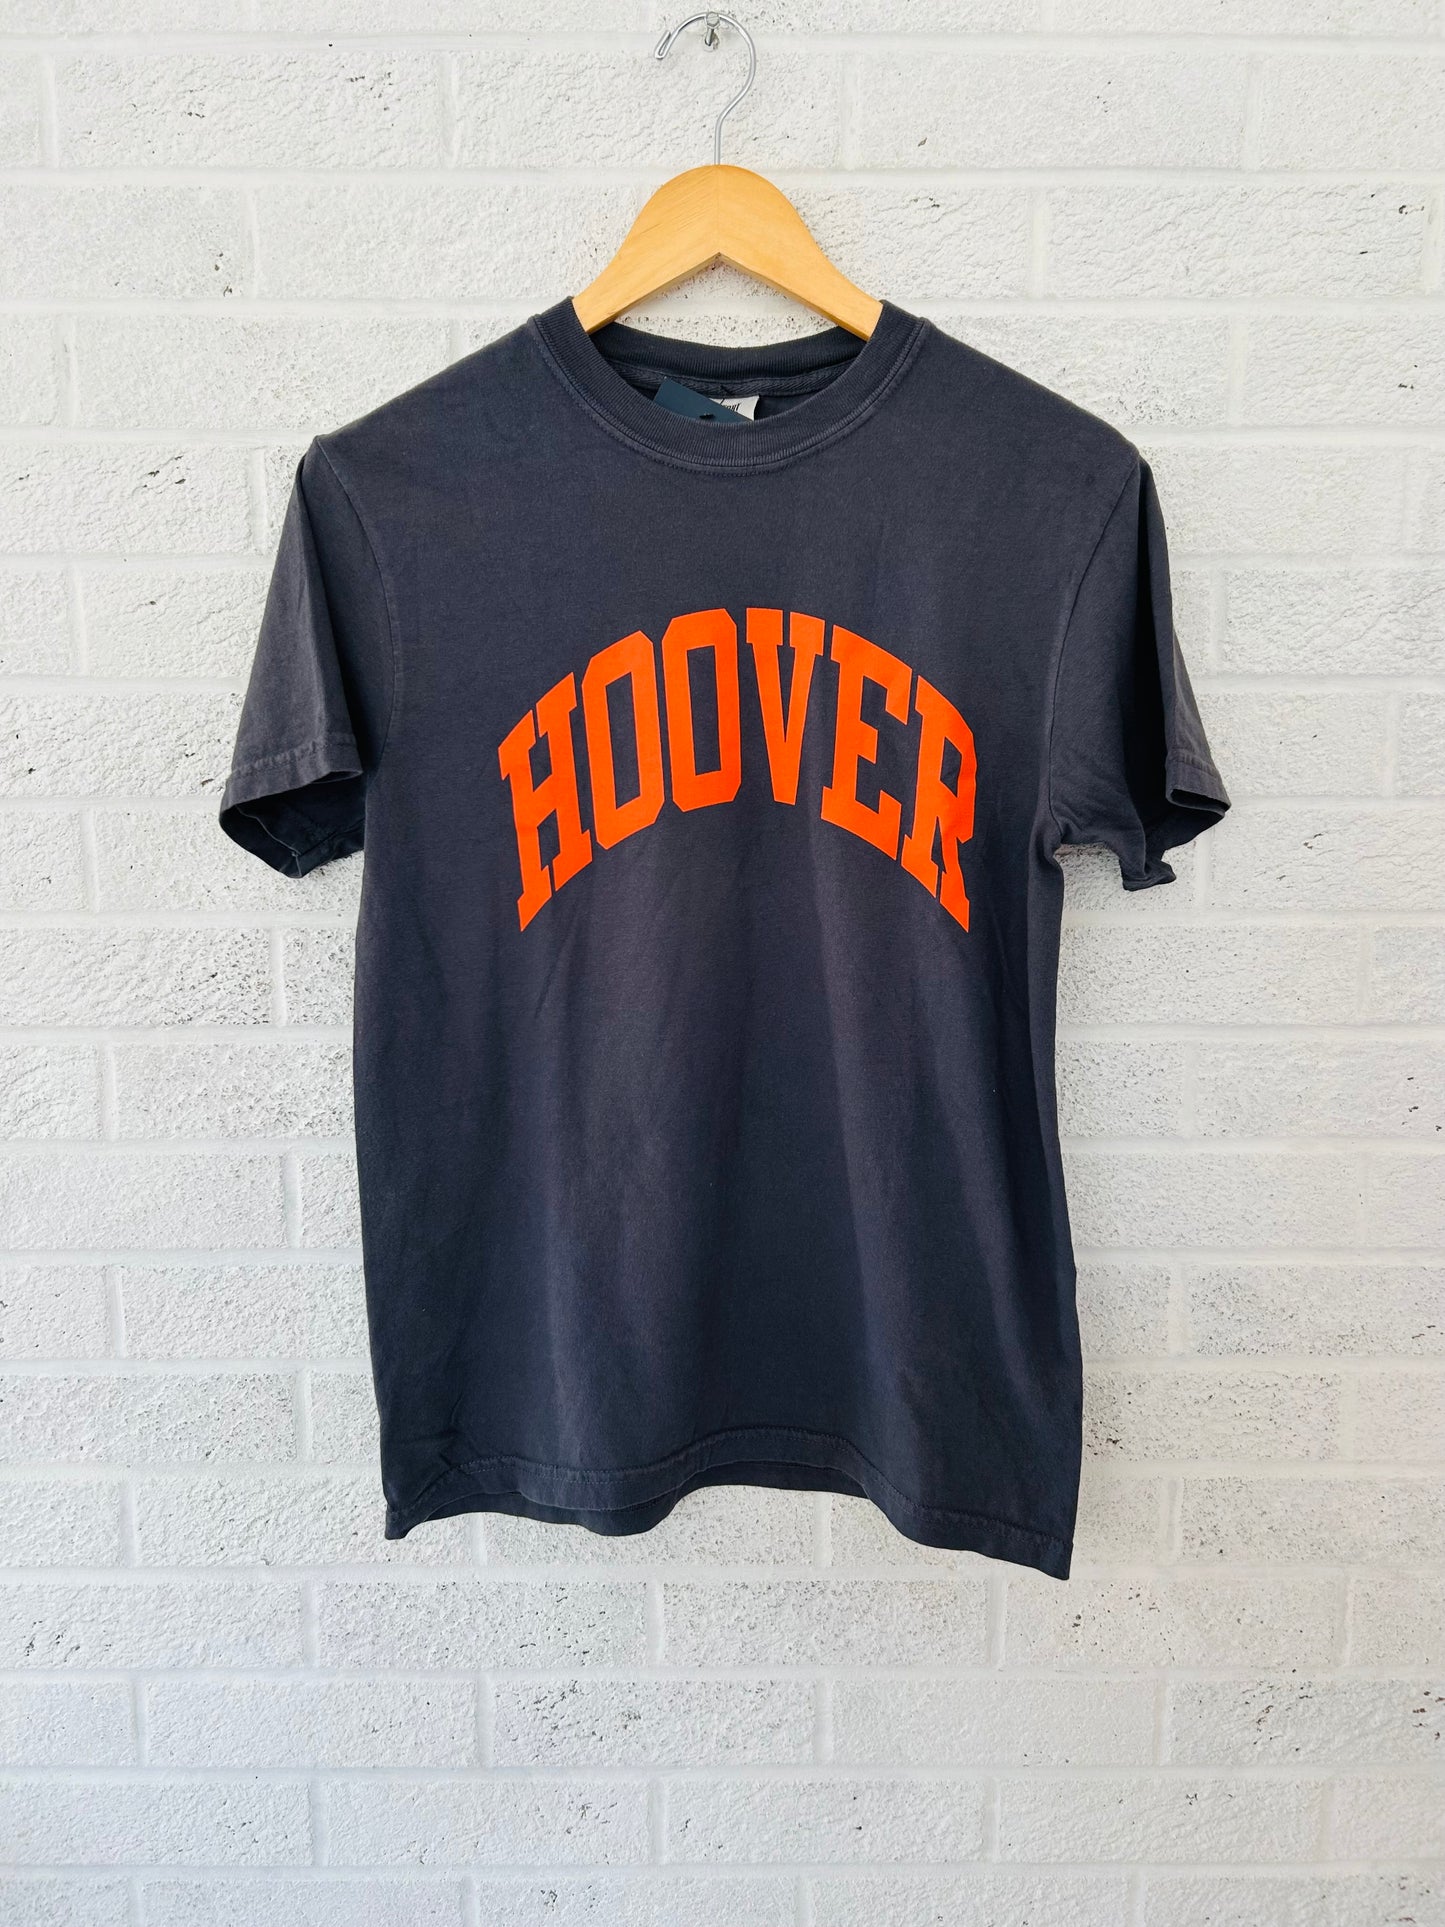 Hoover Arch Vintage Adult T-shirt